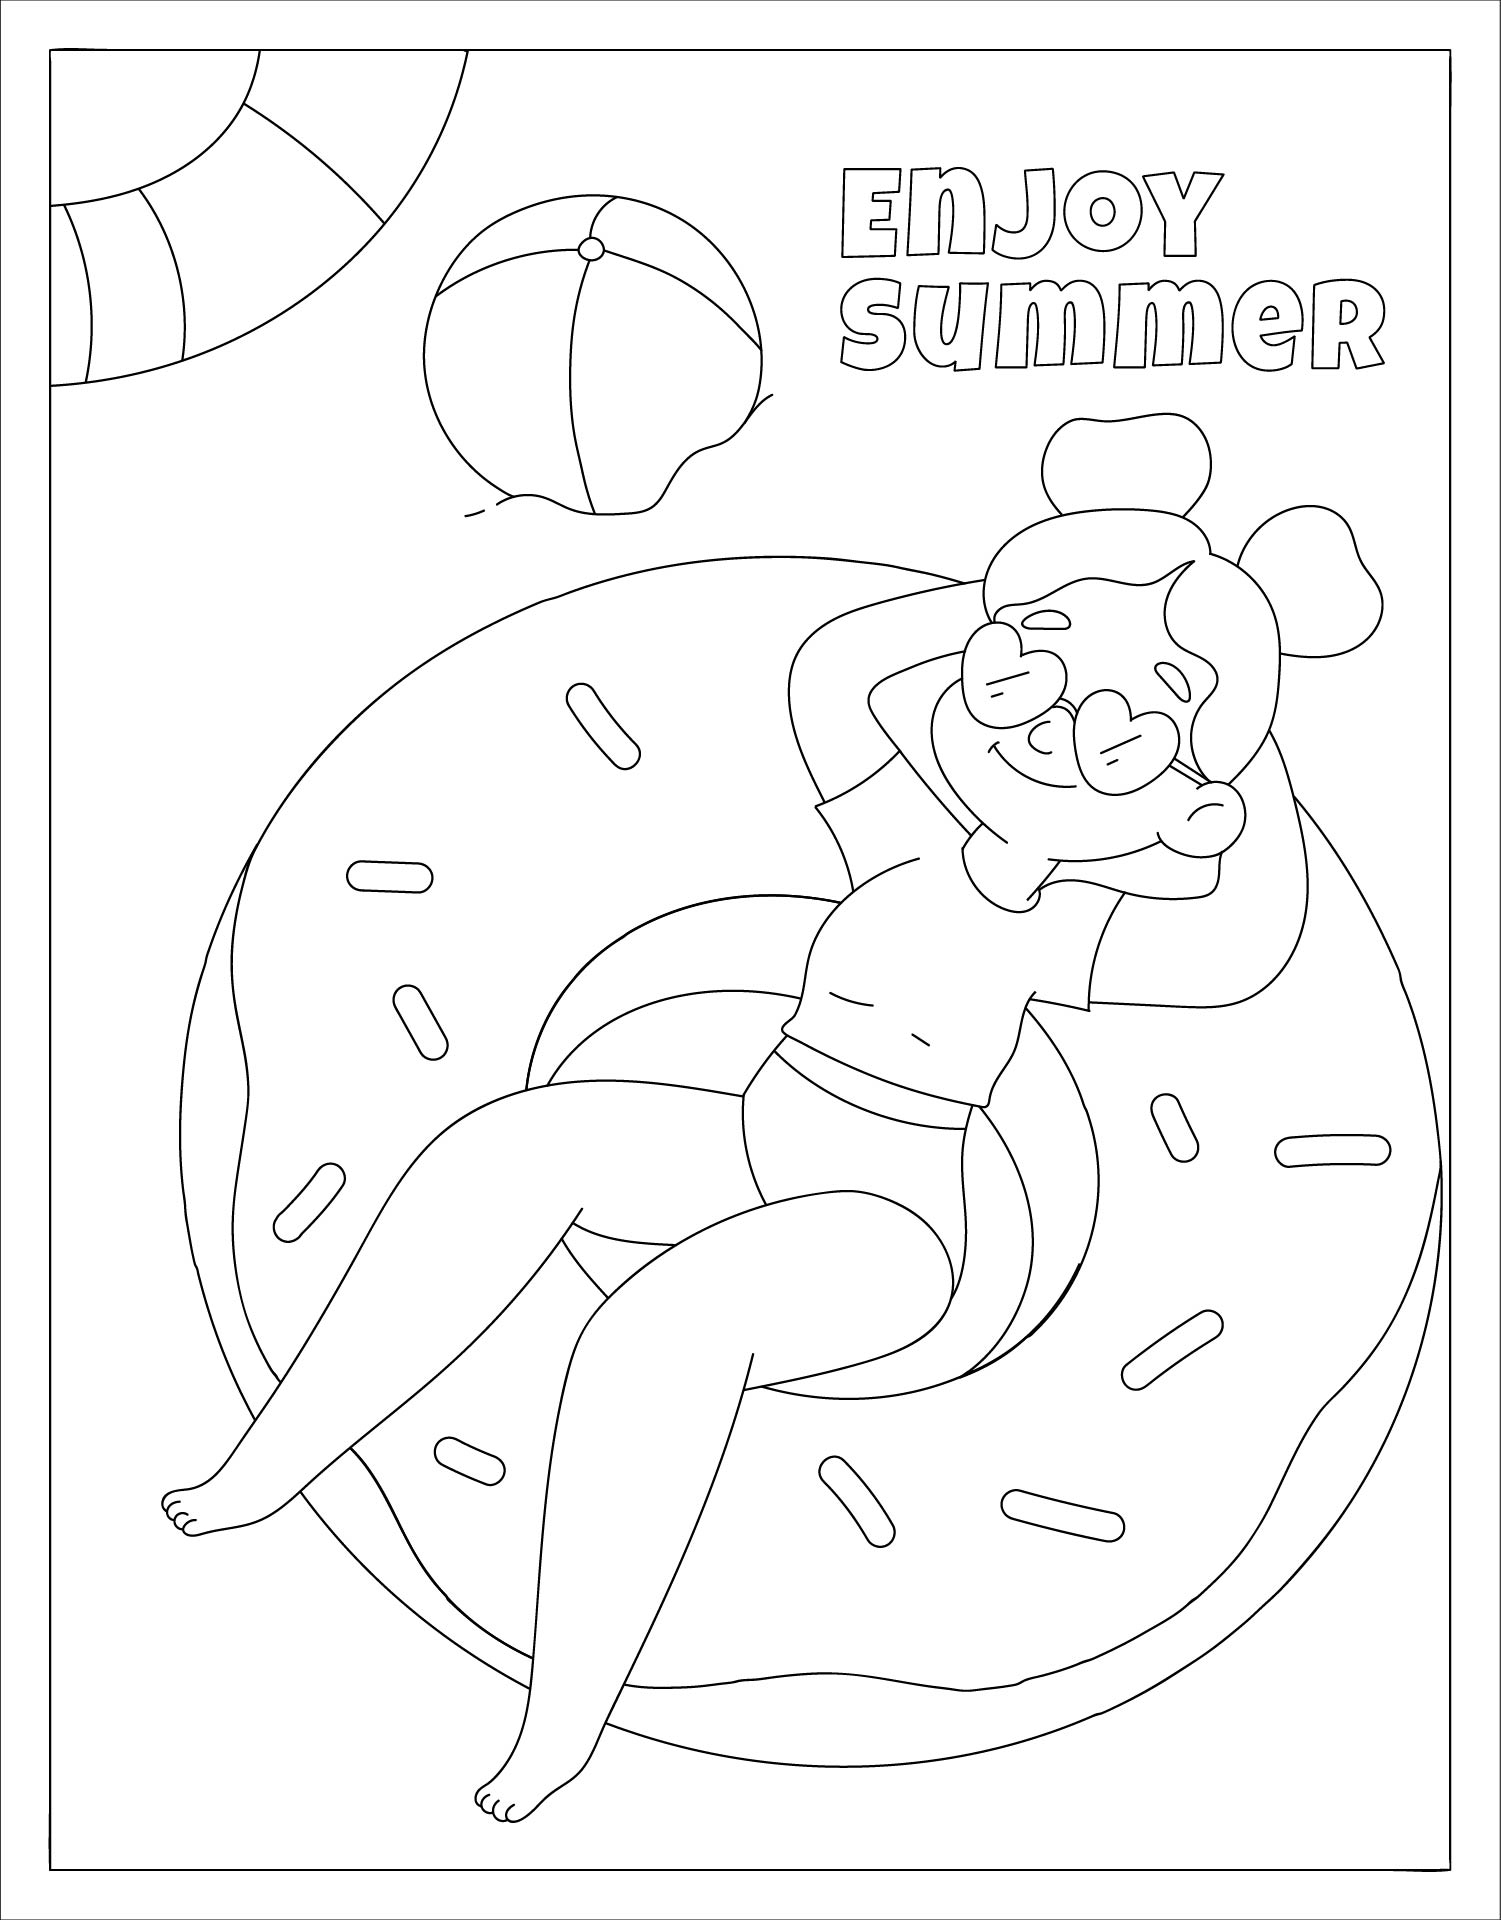 Printable Summer Fun Coloring Pages